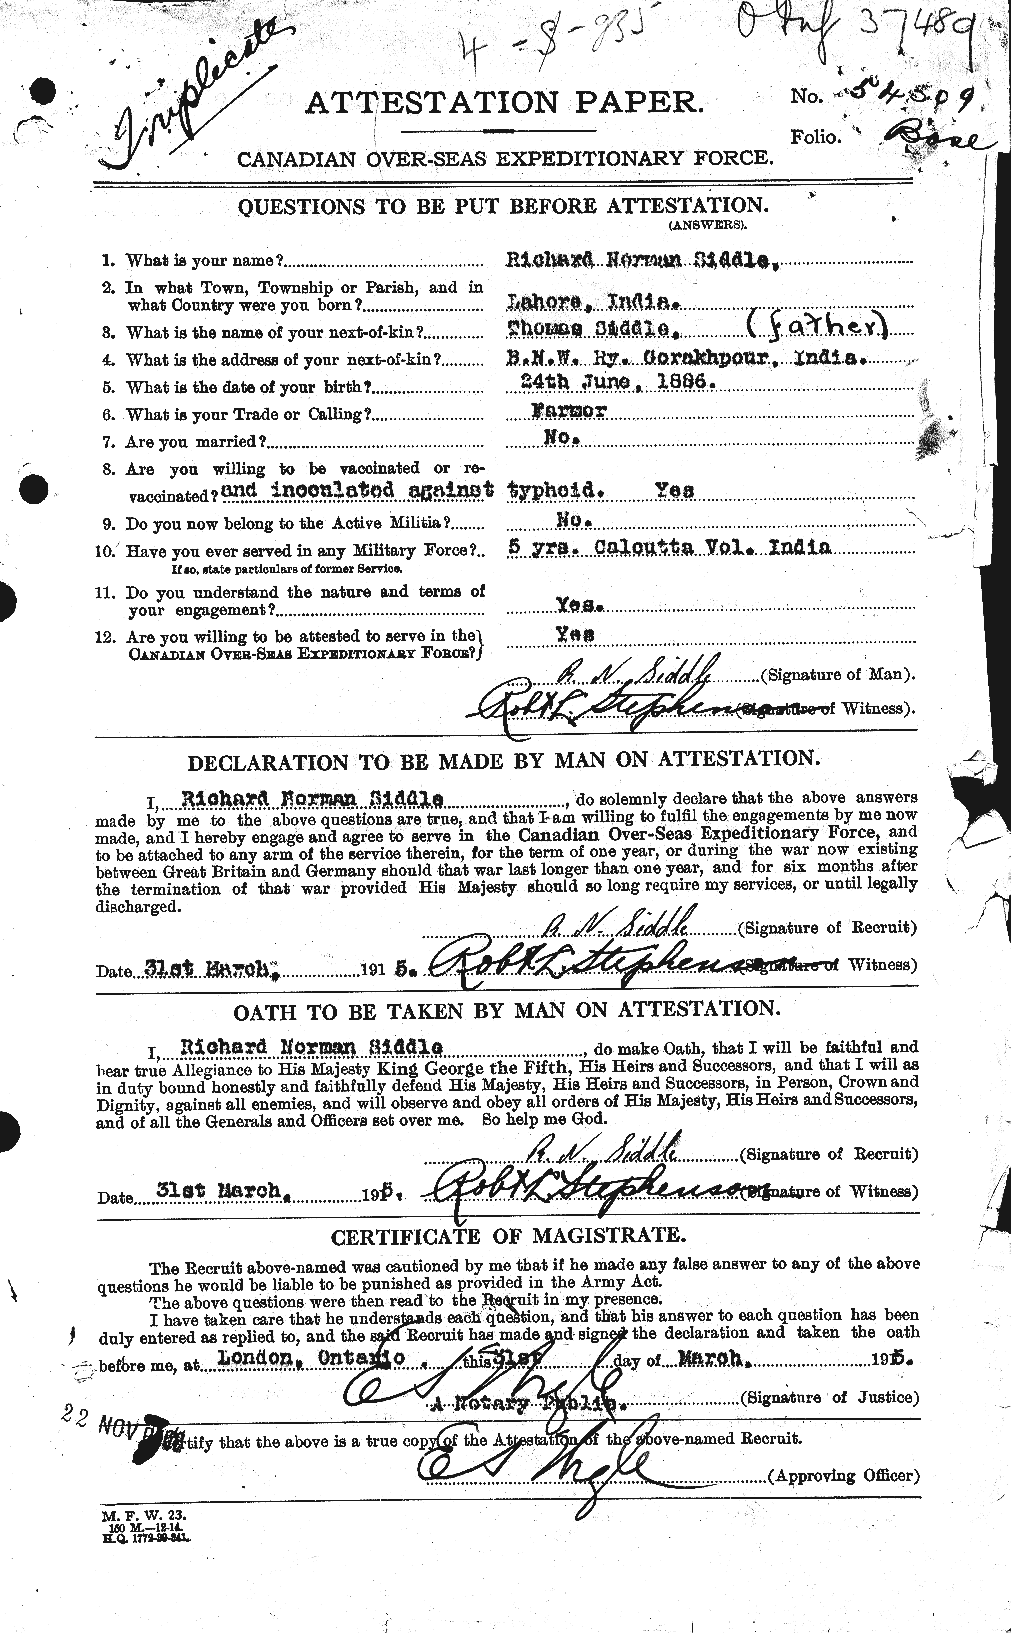 Personnel Records of the First World War - CEF 095967a